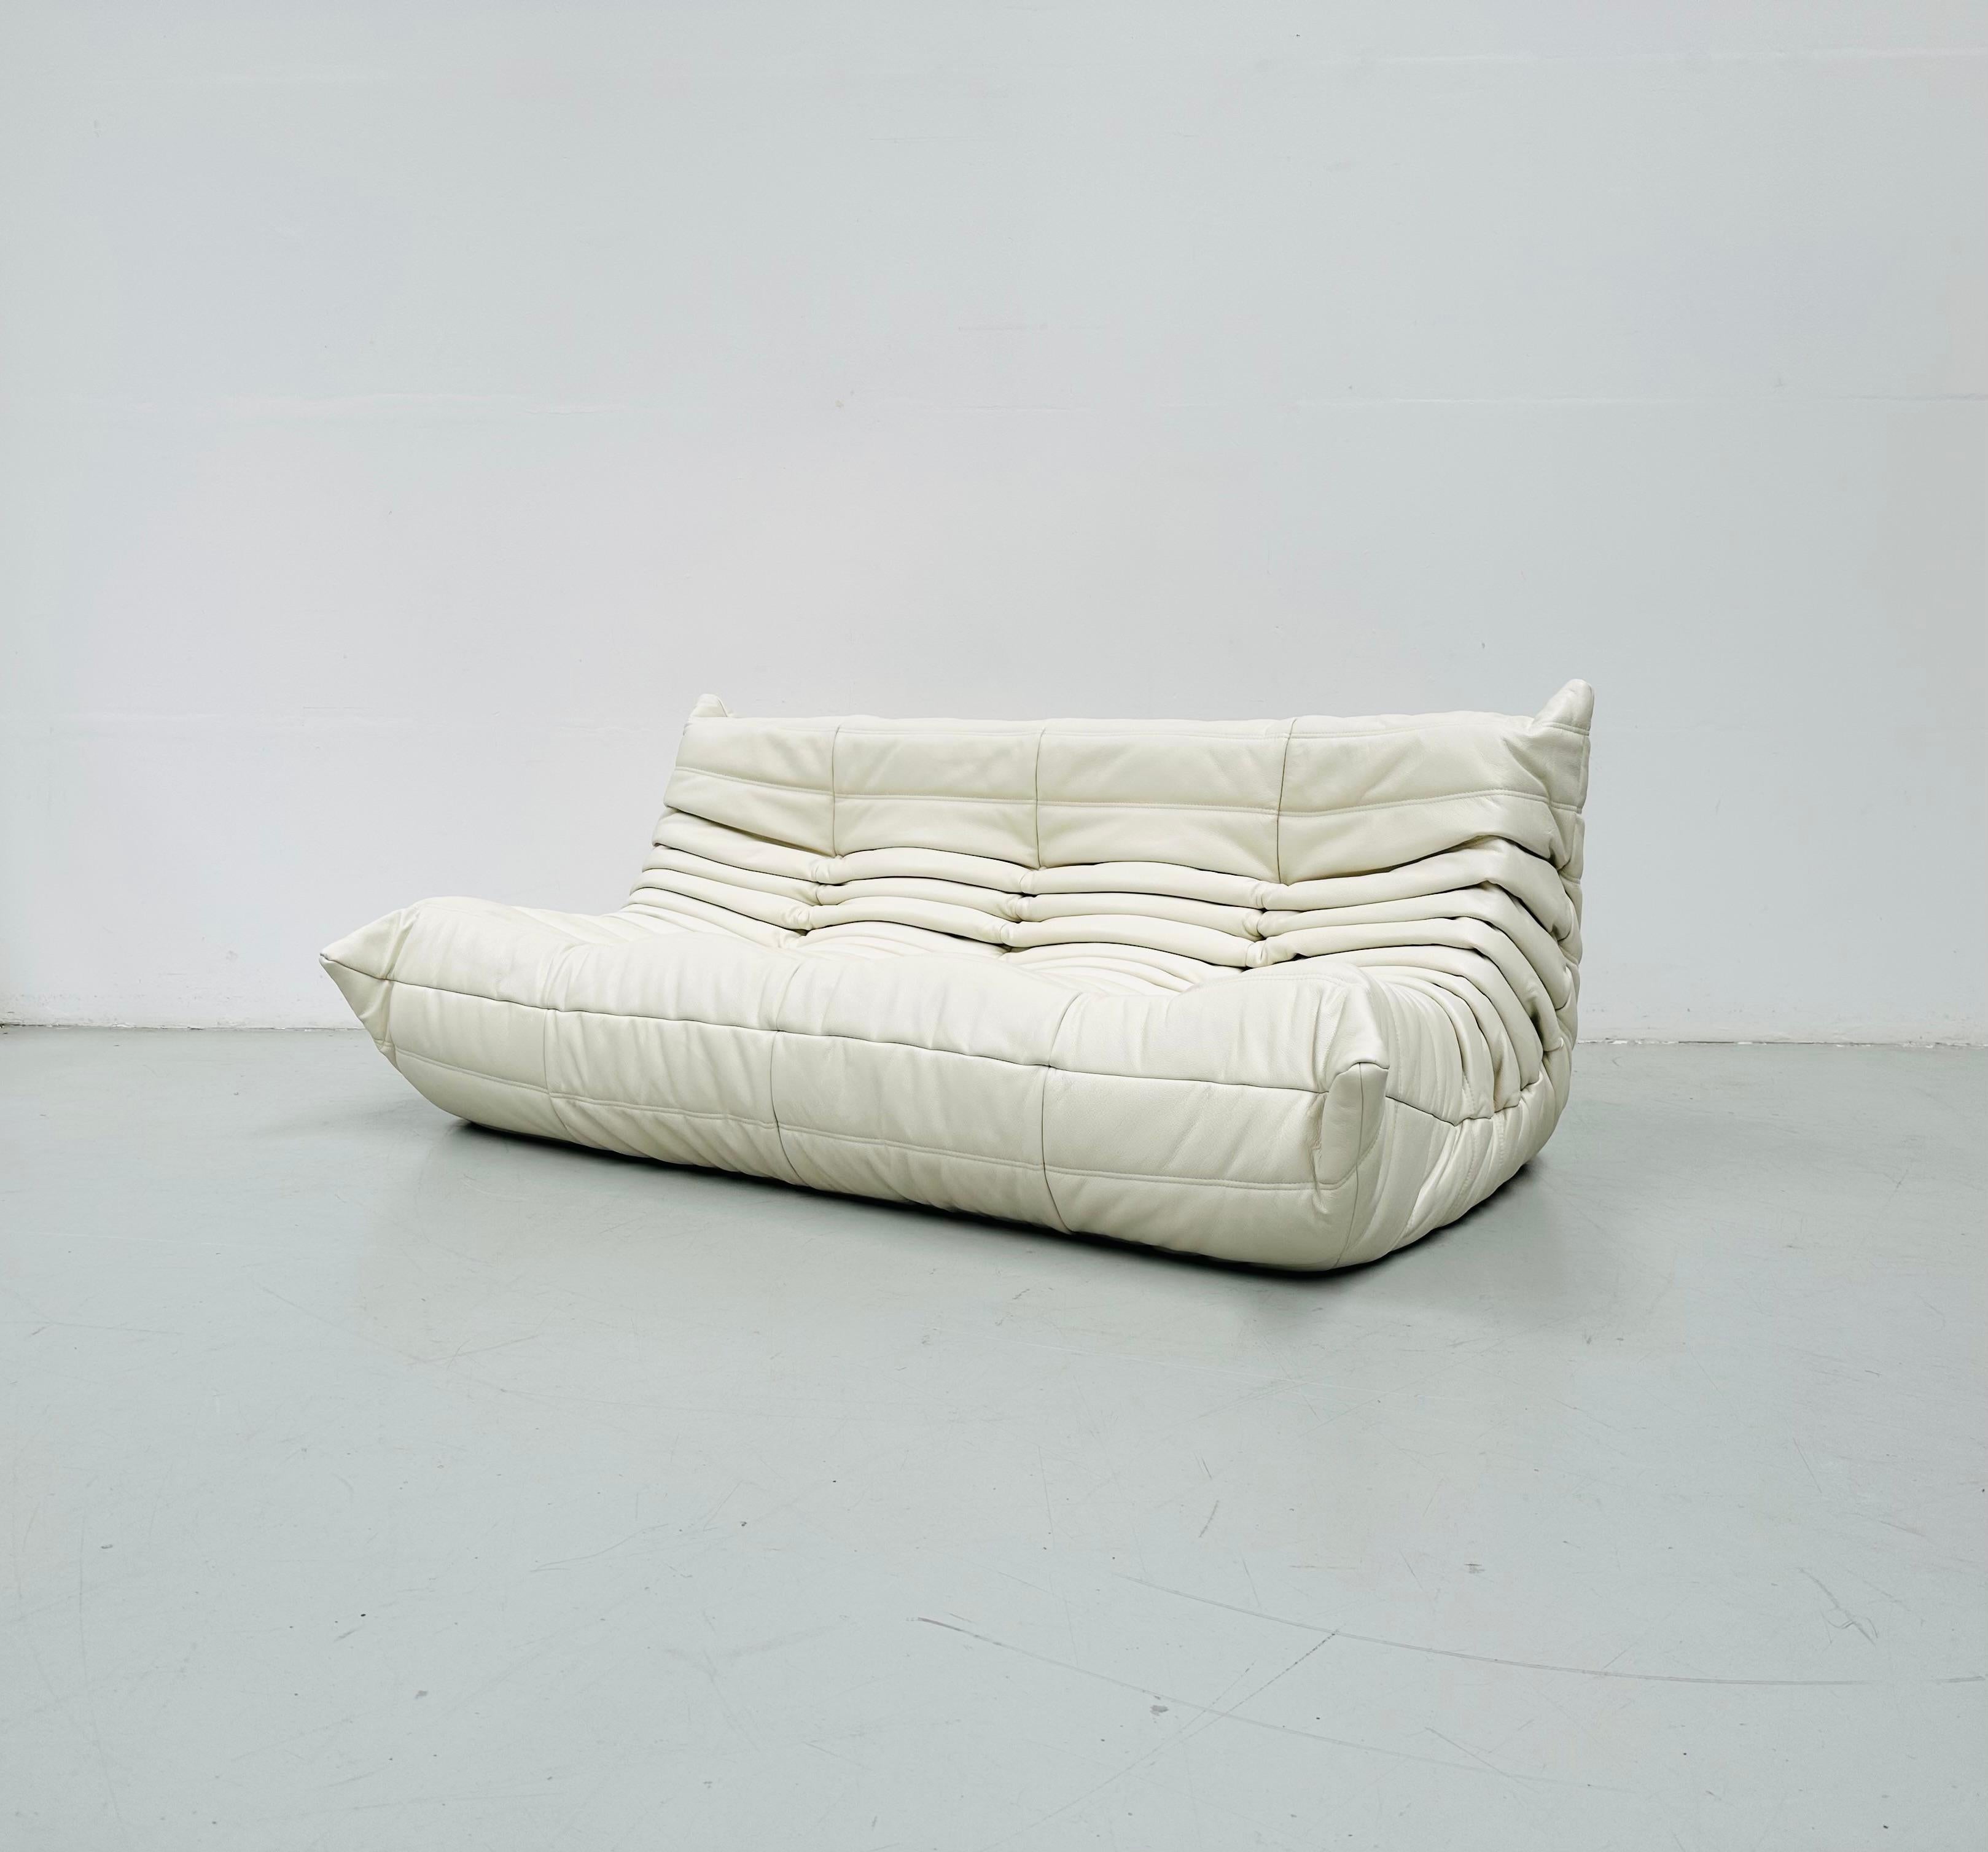 Mid-Century Modern French Togo Sofa in White Leather by Michel Ducaroy for Ligne Roset.